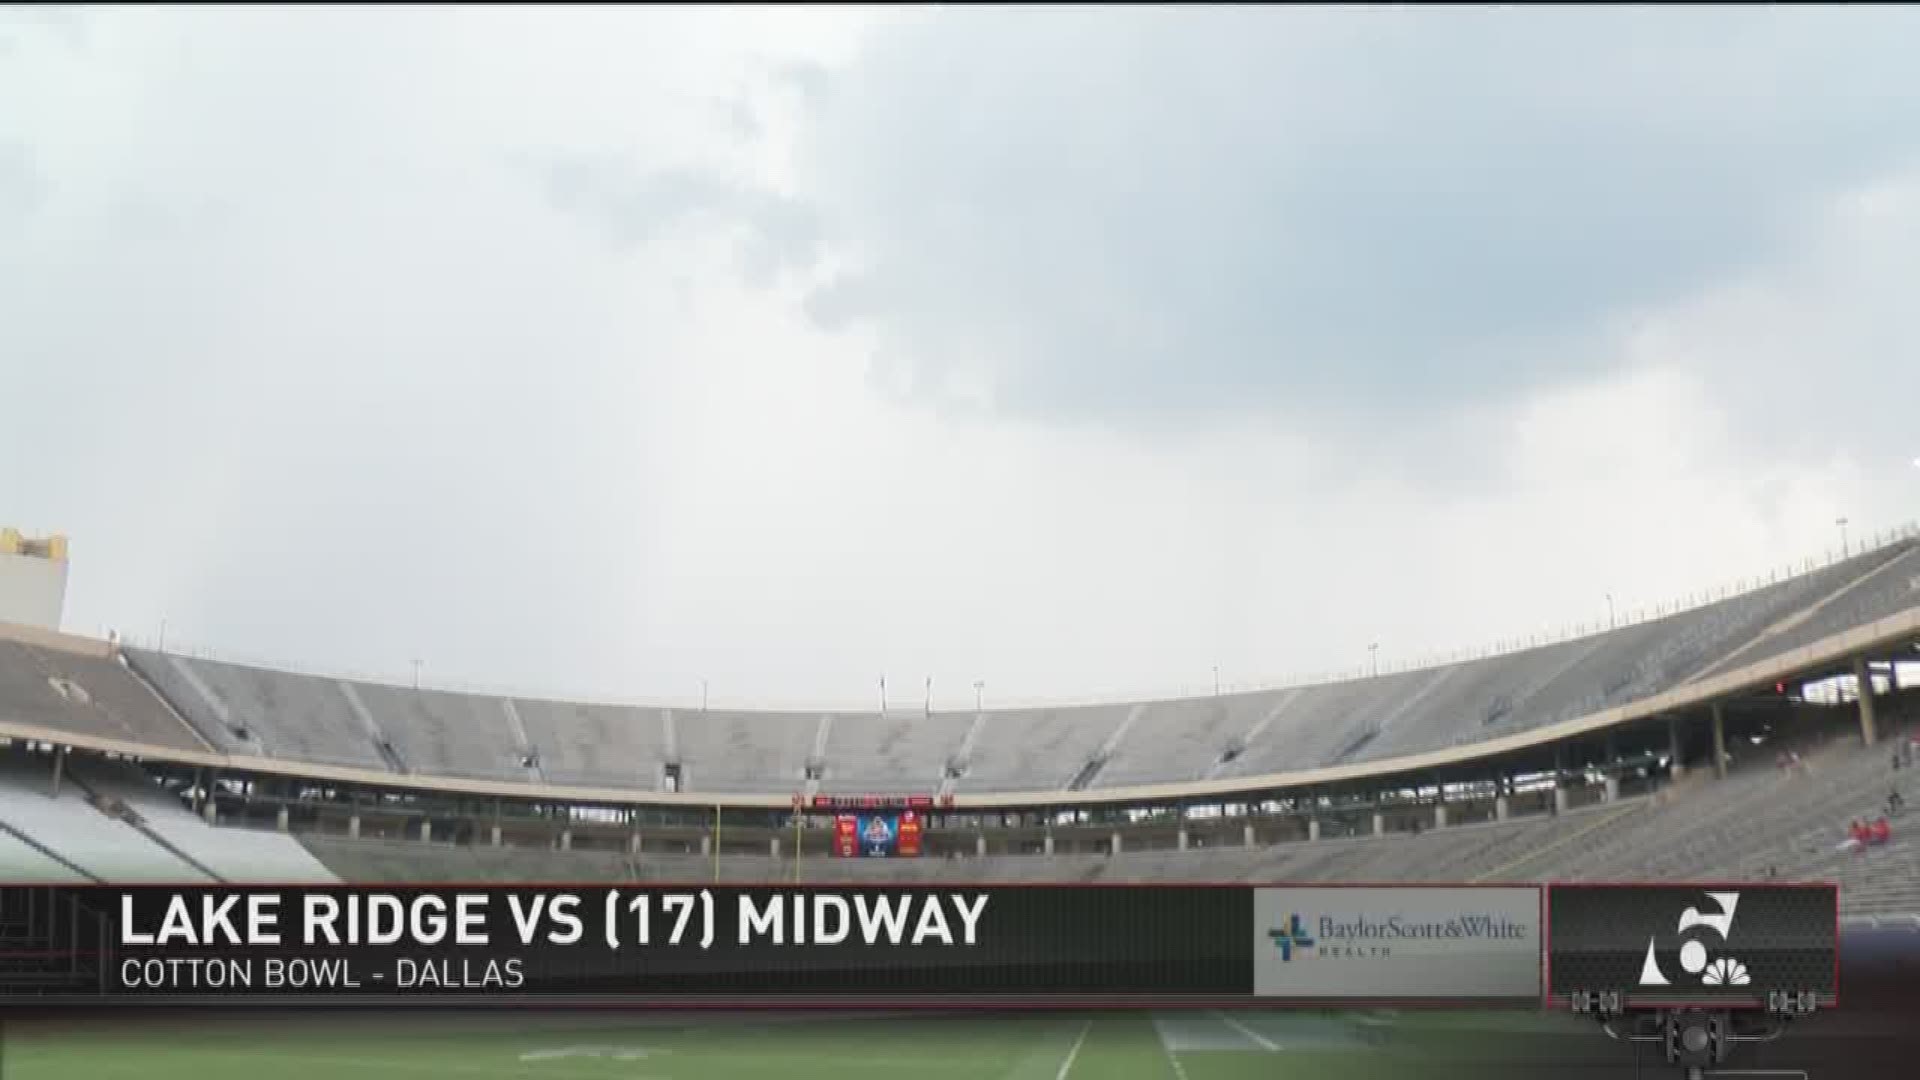 Lake Ridge and MIdway game cancelled at the Cotton Ball.